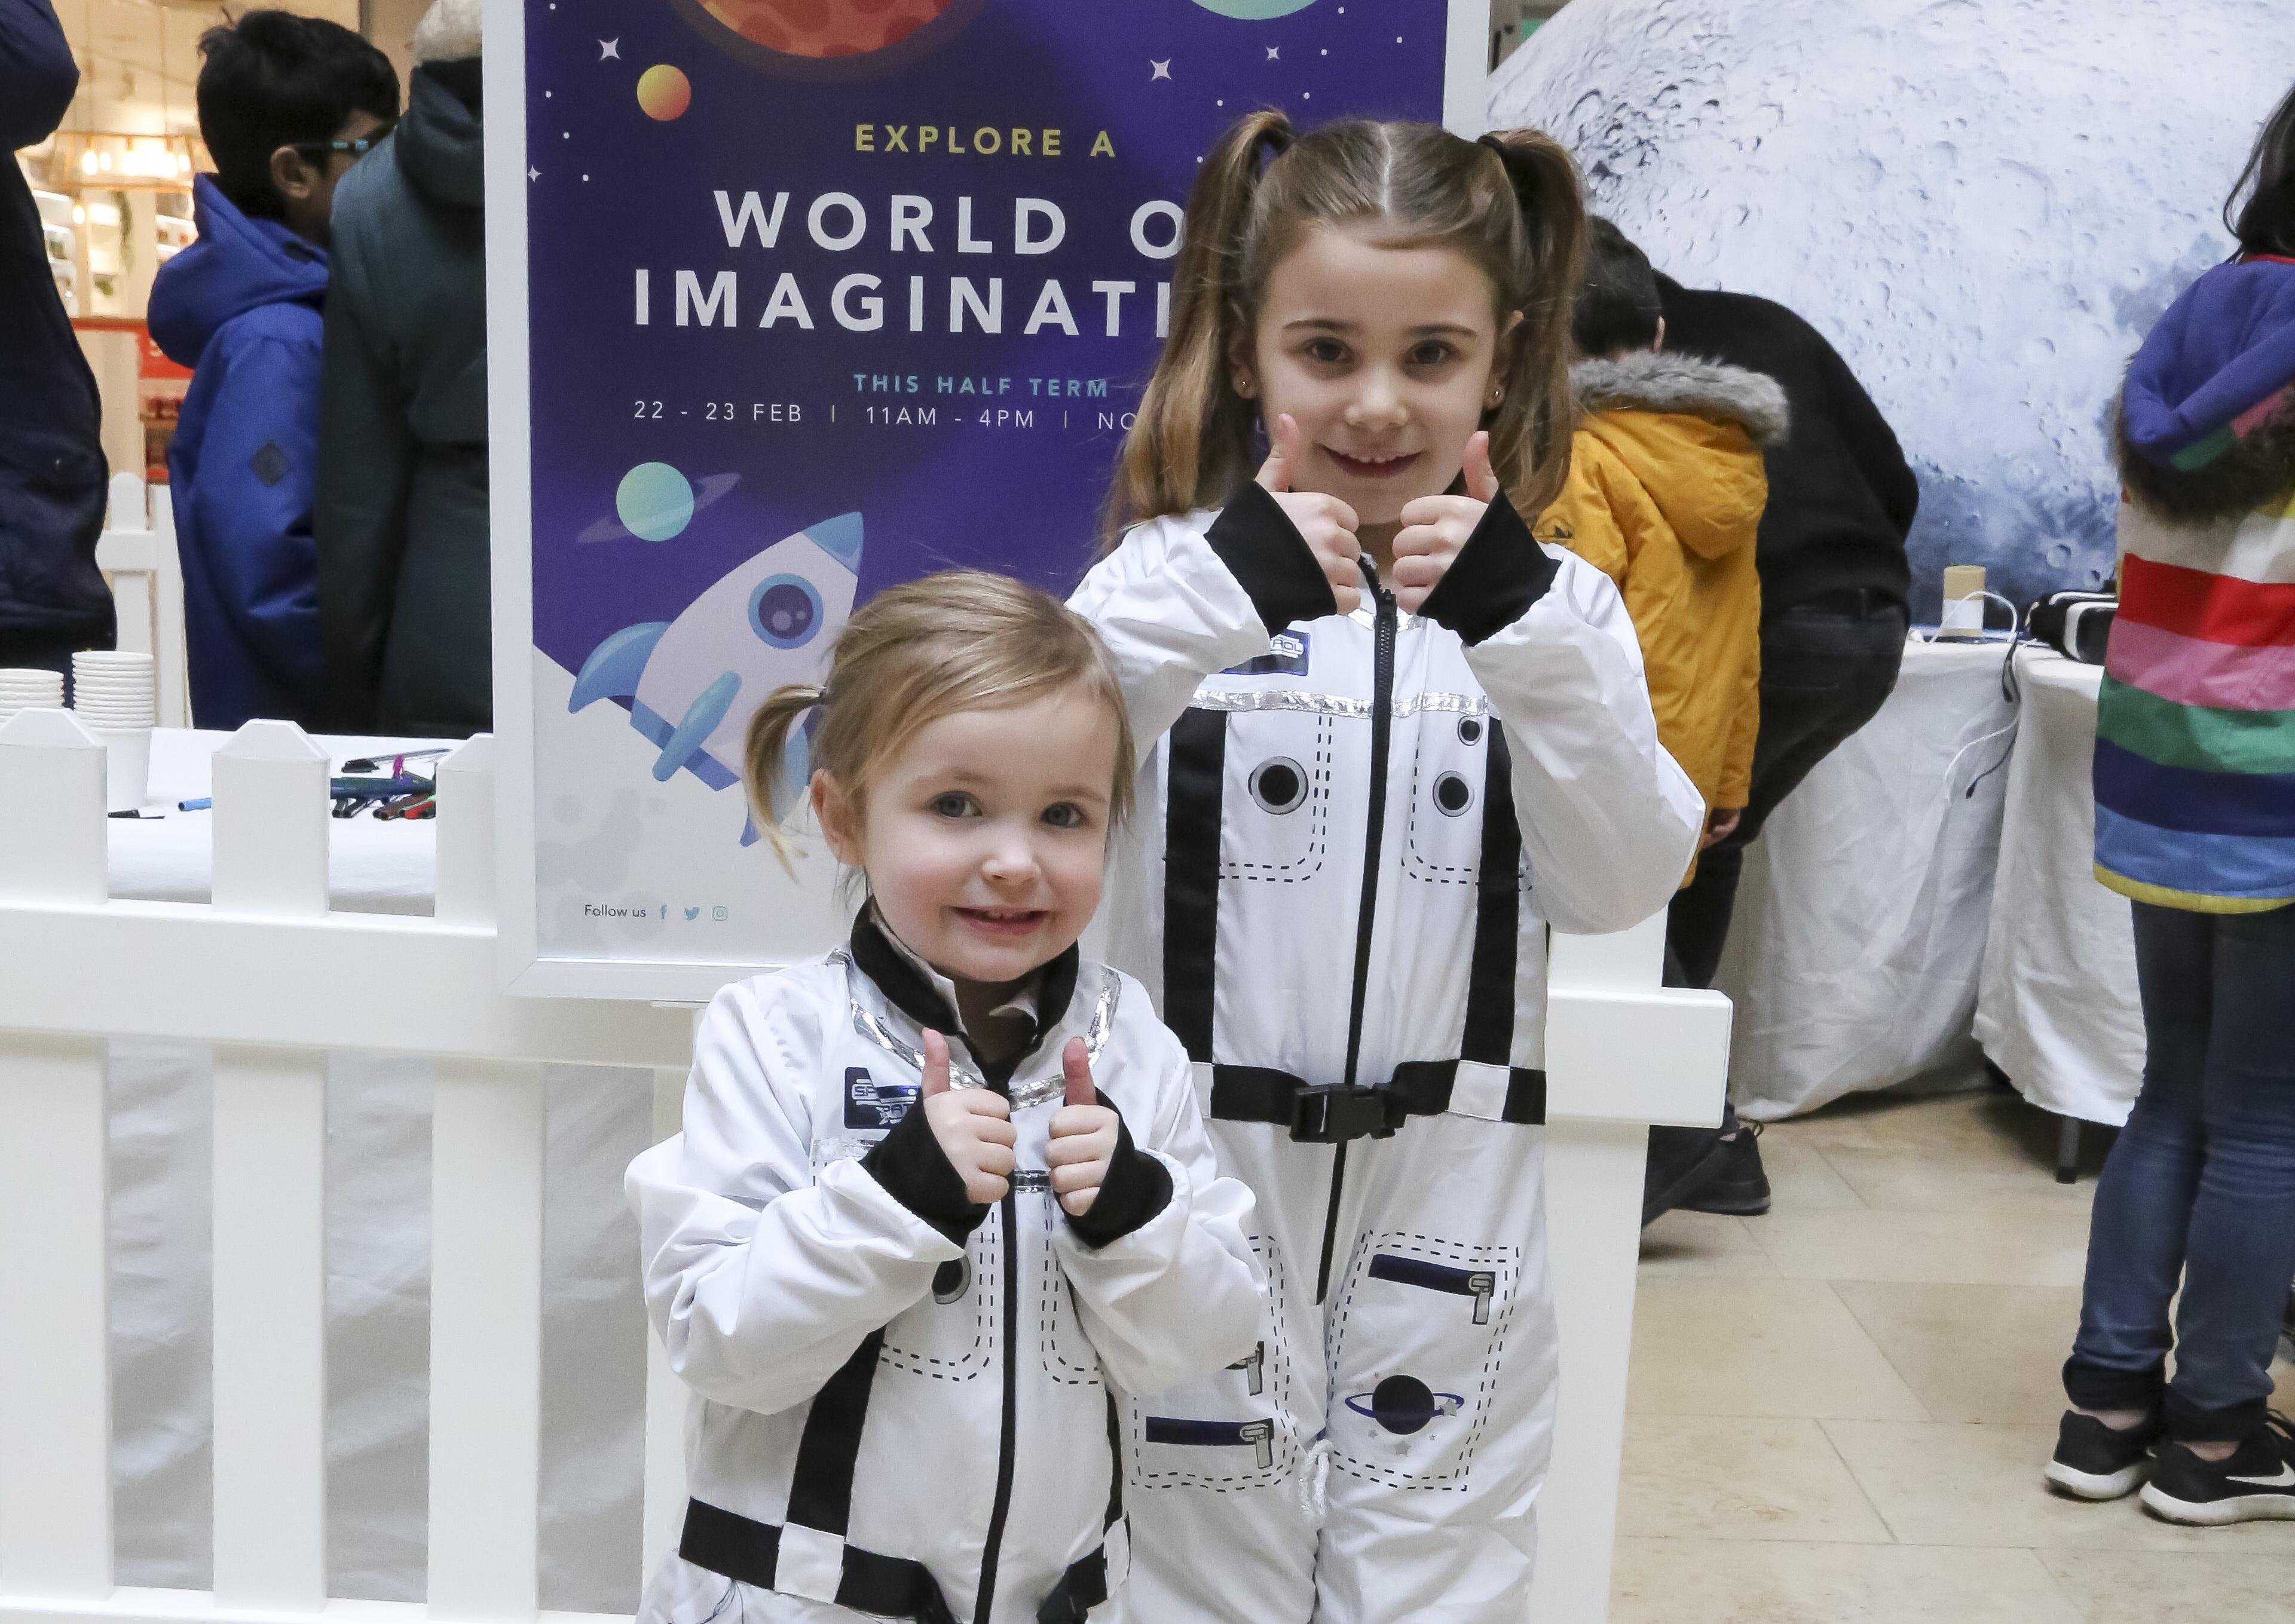 A World of Imagination space-themed event at Queensgate in Peterborough